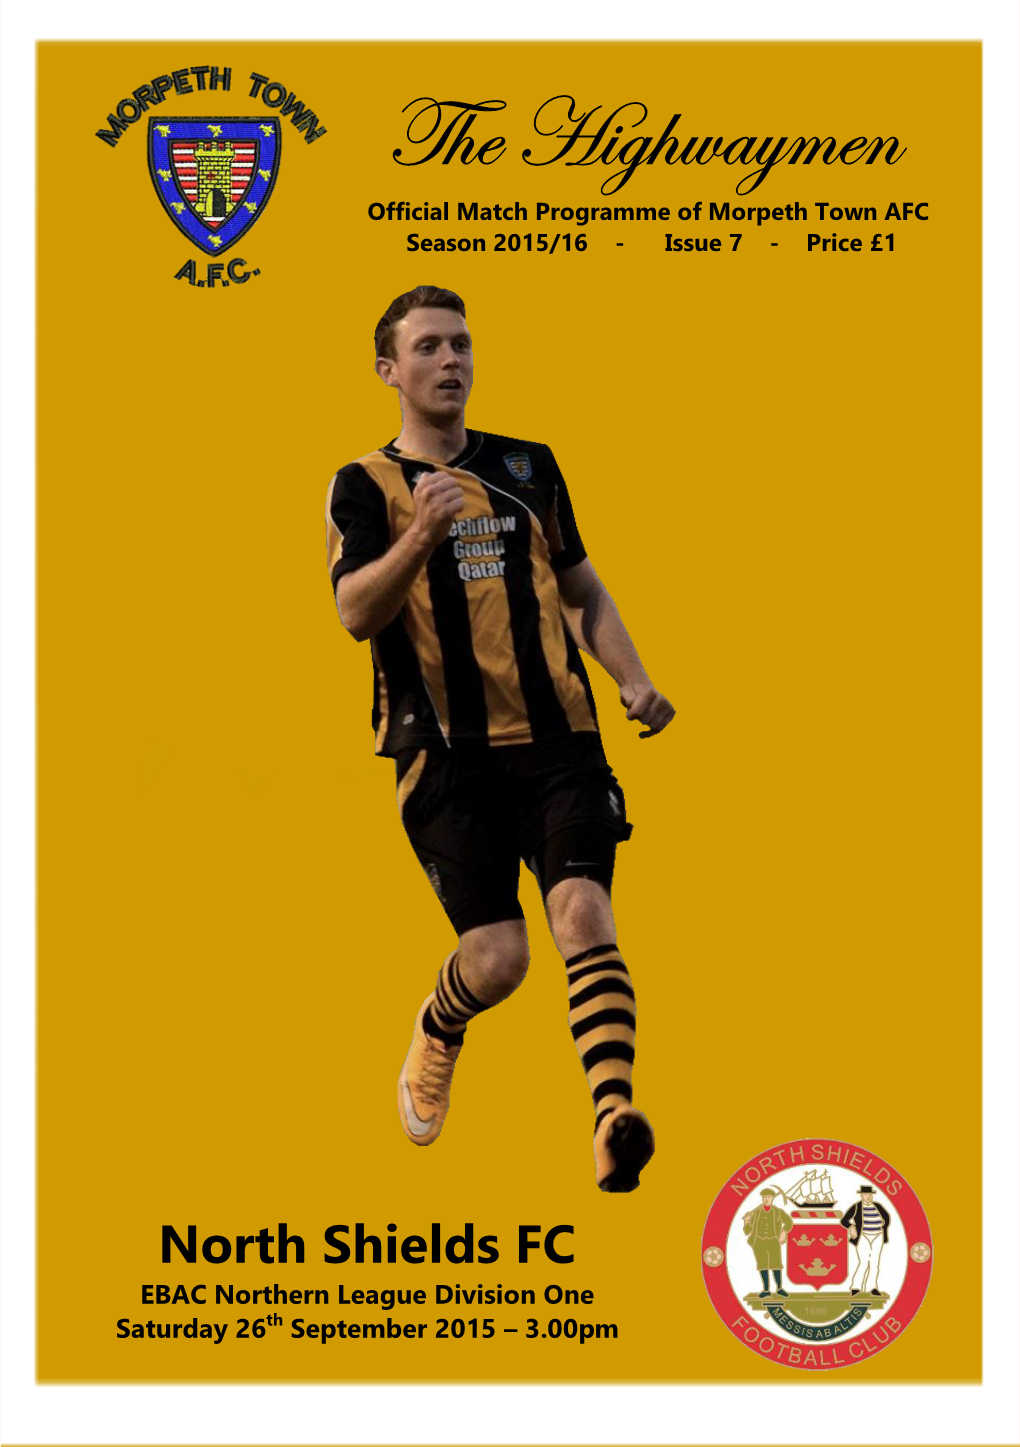 The Highwaymen Official Match Programme of Morpeth Town AFC Season 2015/16 - Issue 7 - Price £1